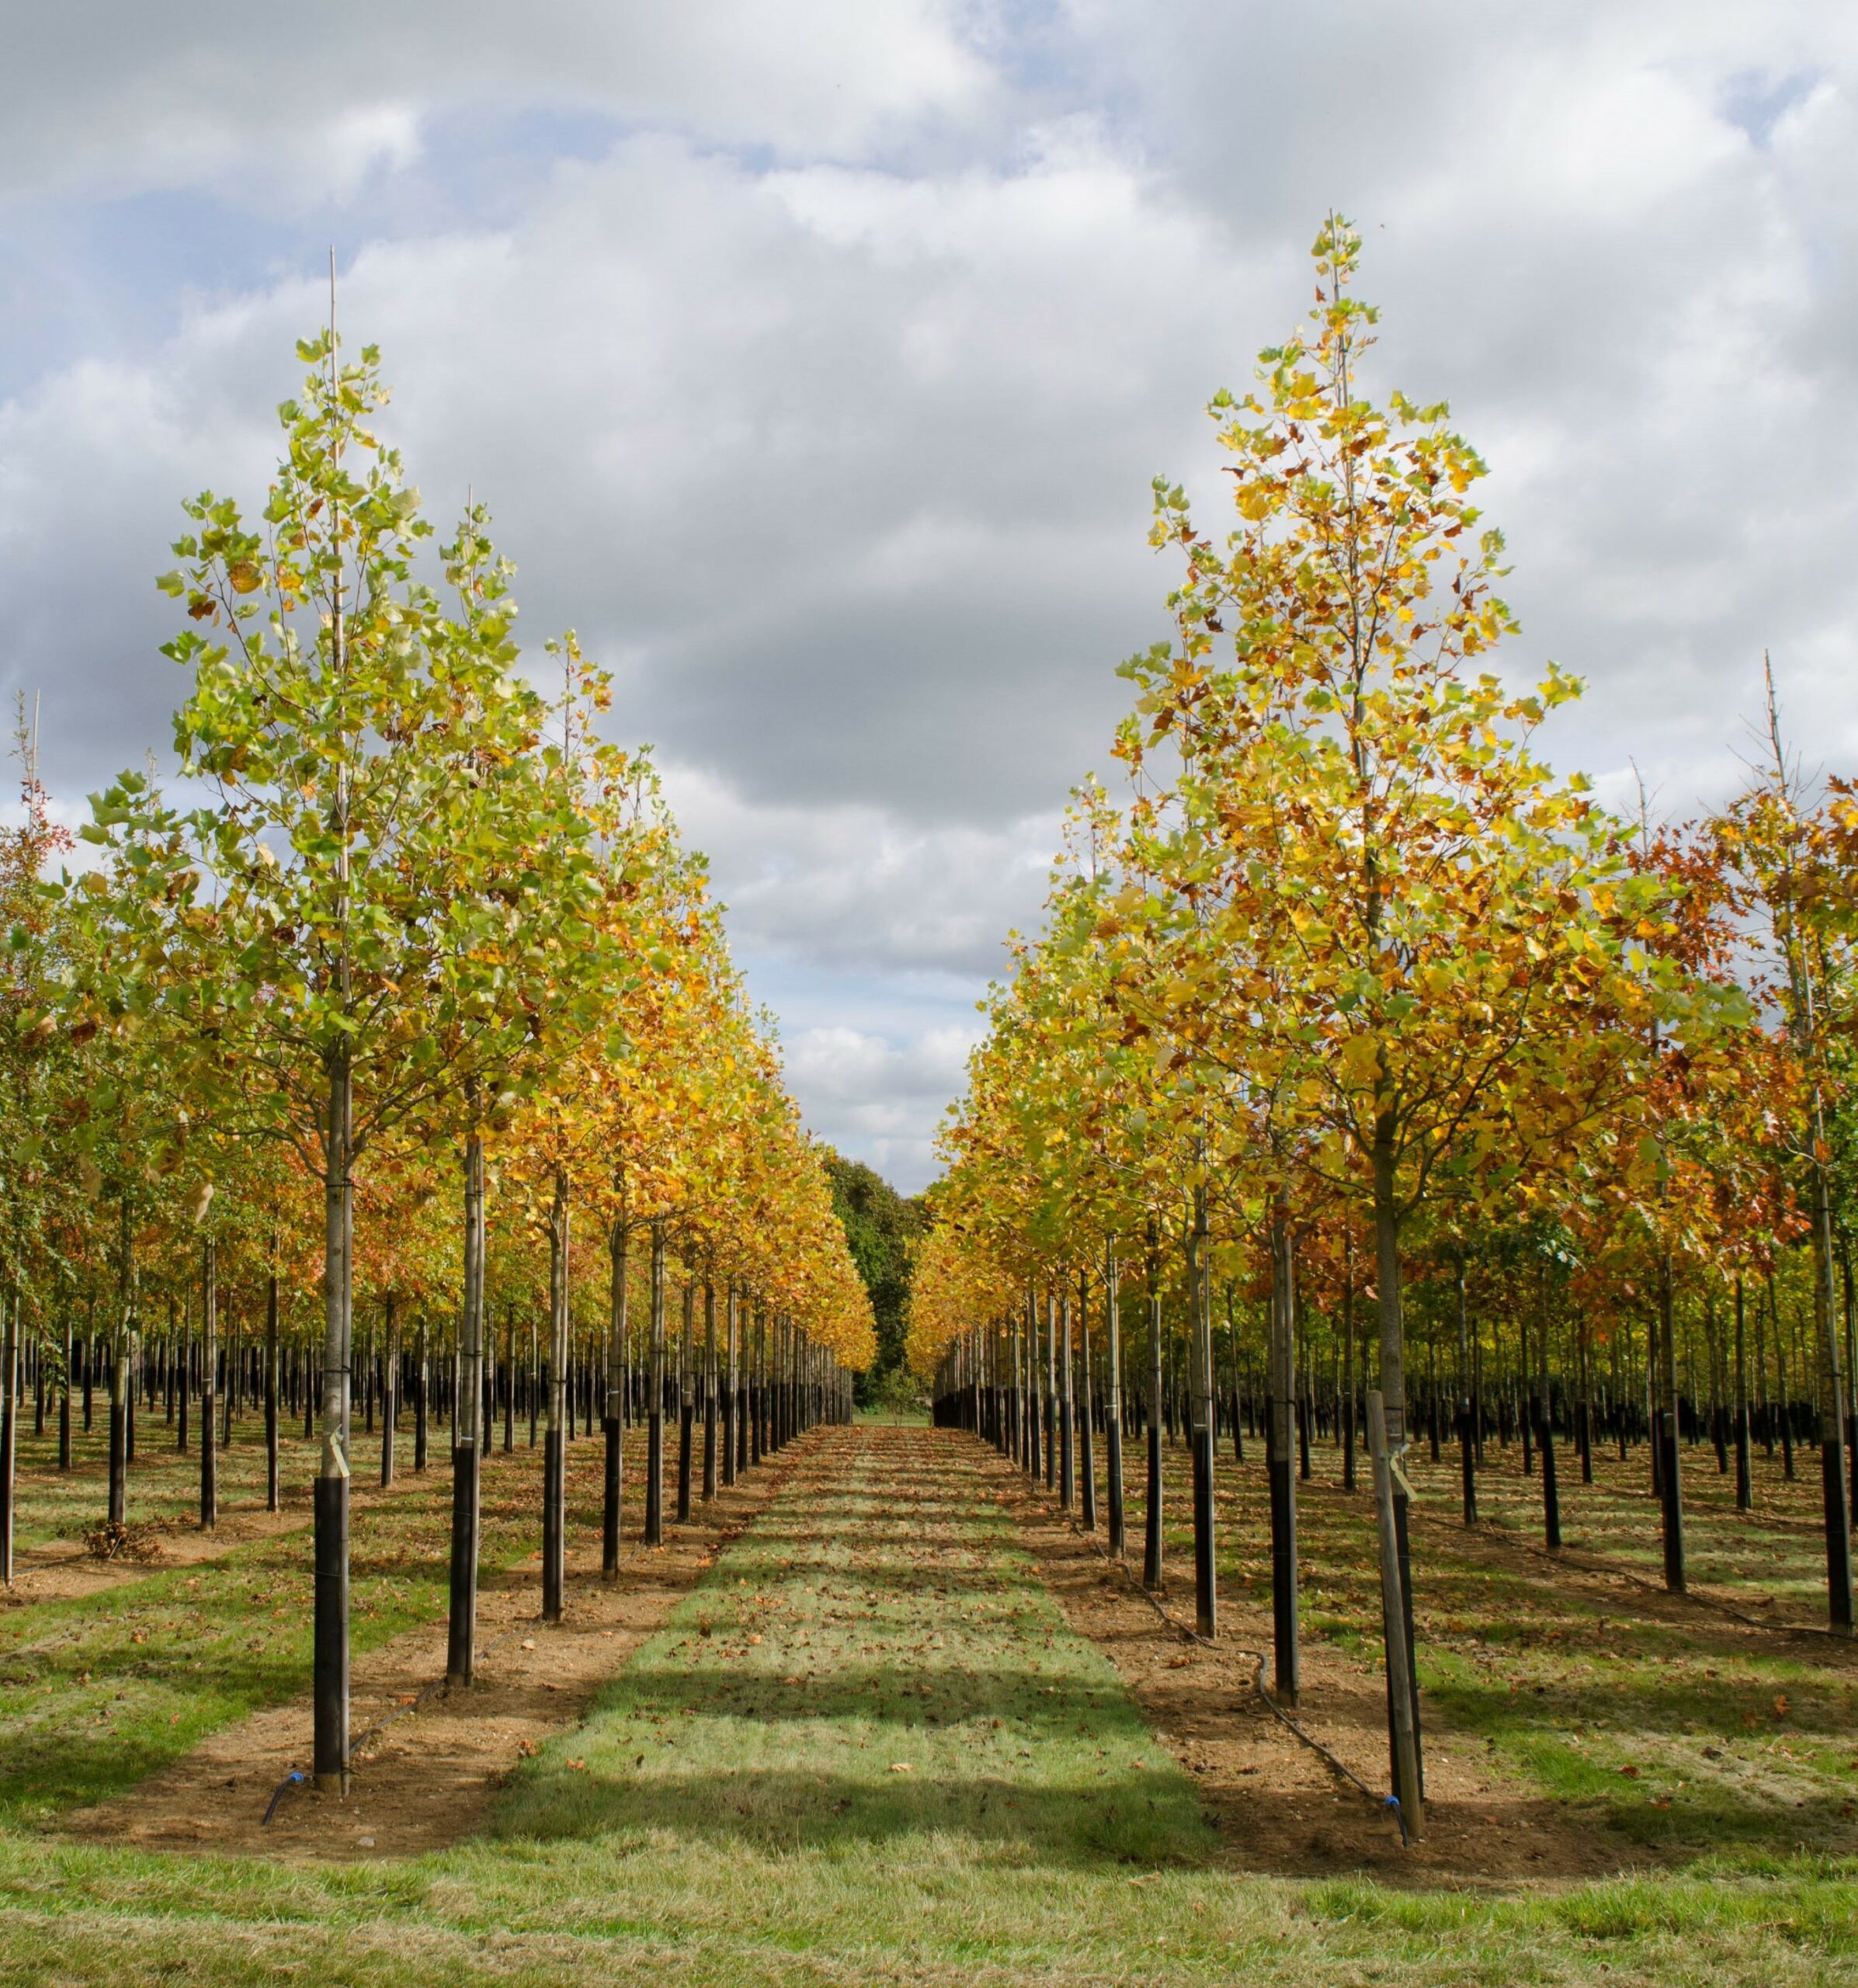 Liriodendron Tulipifera trees growing in field